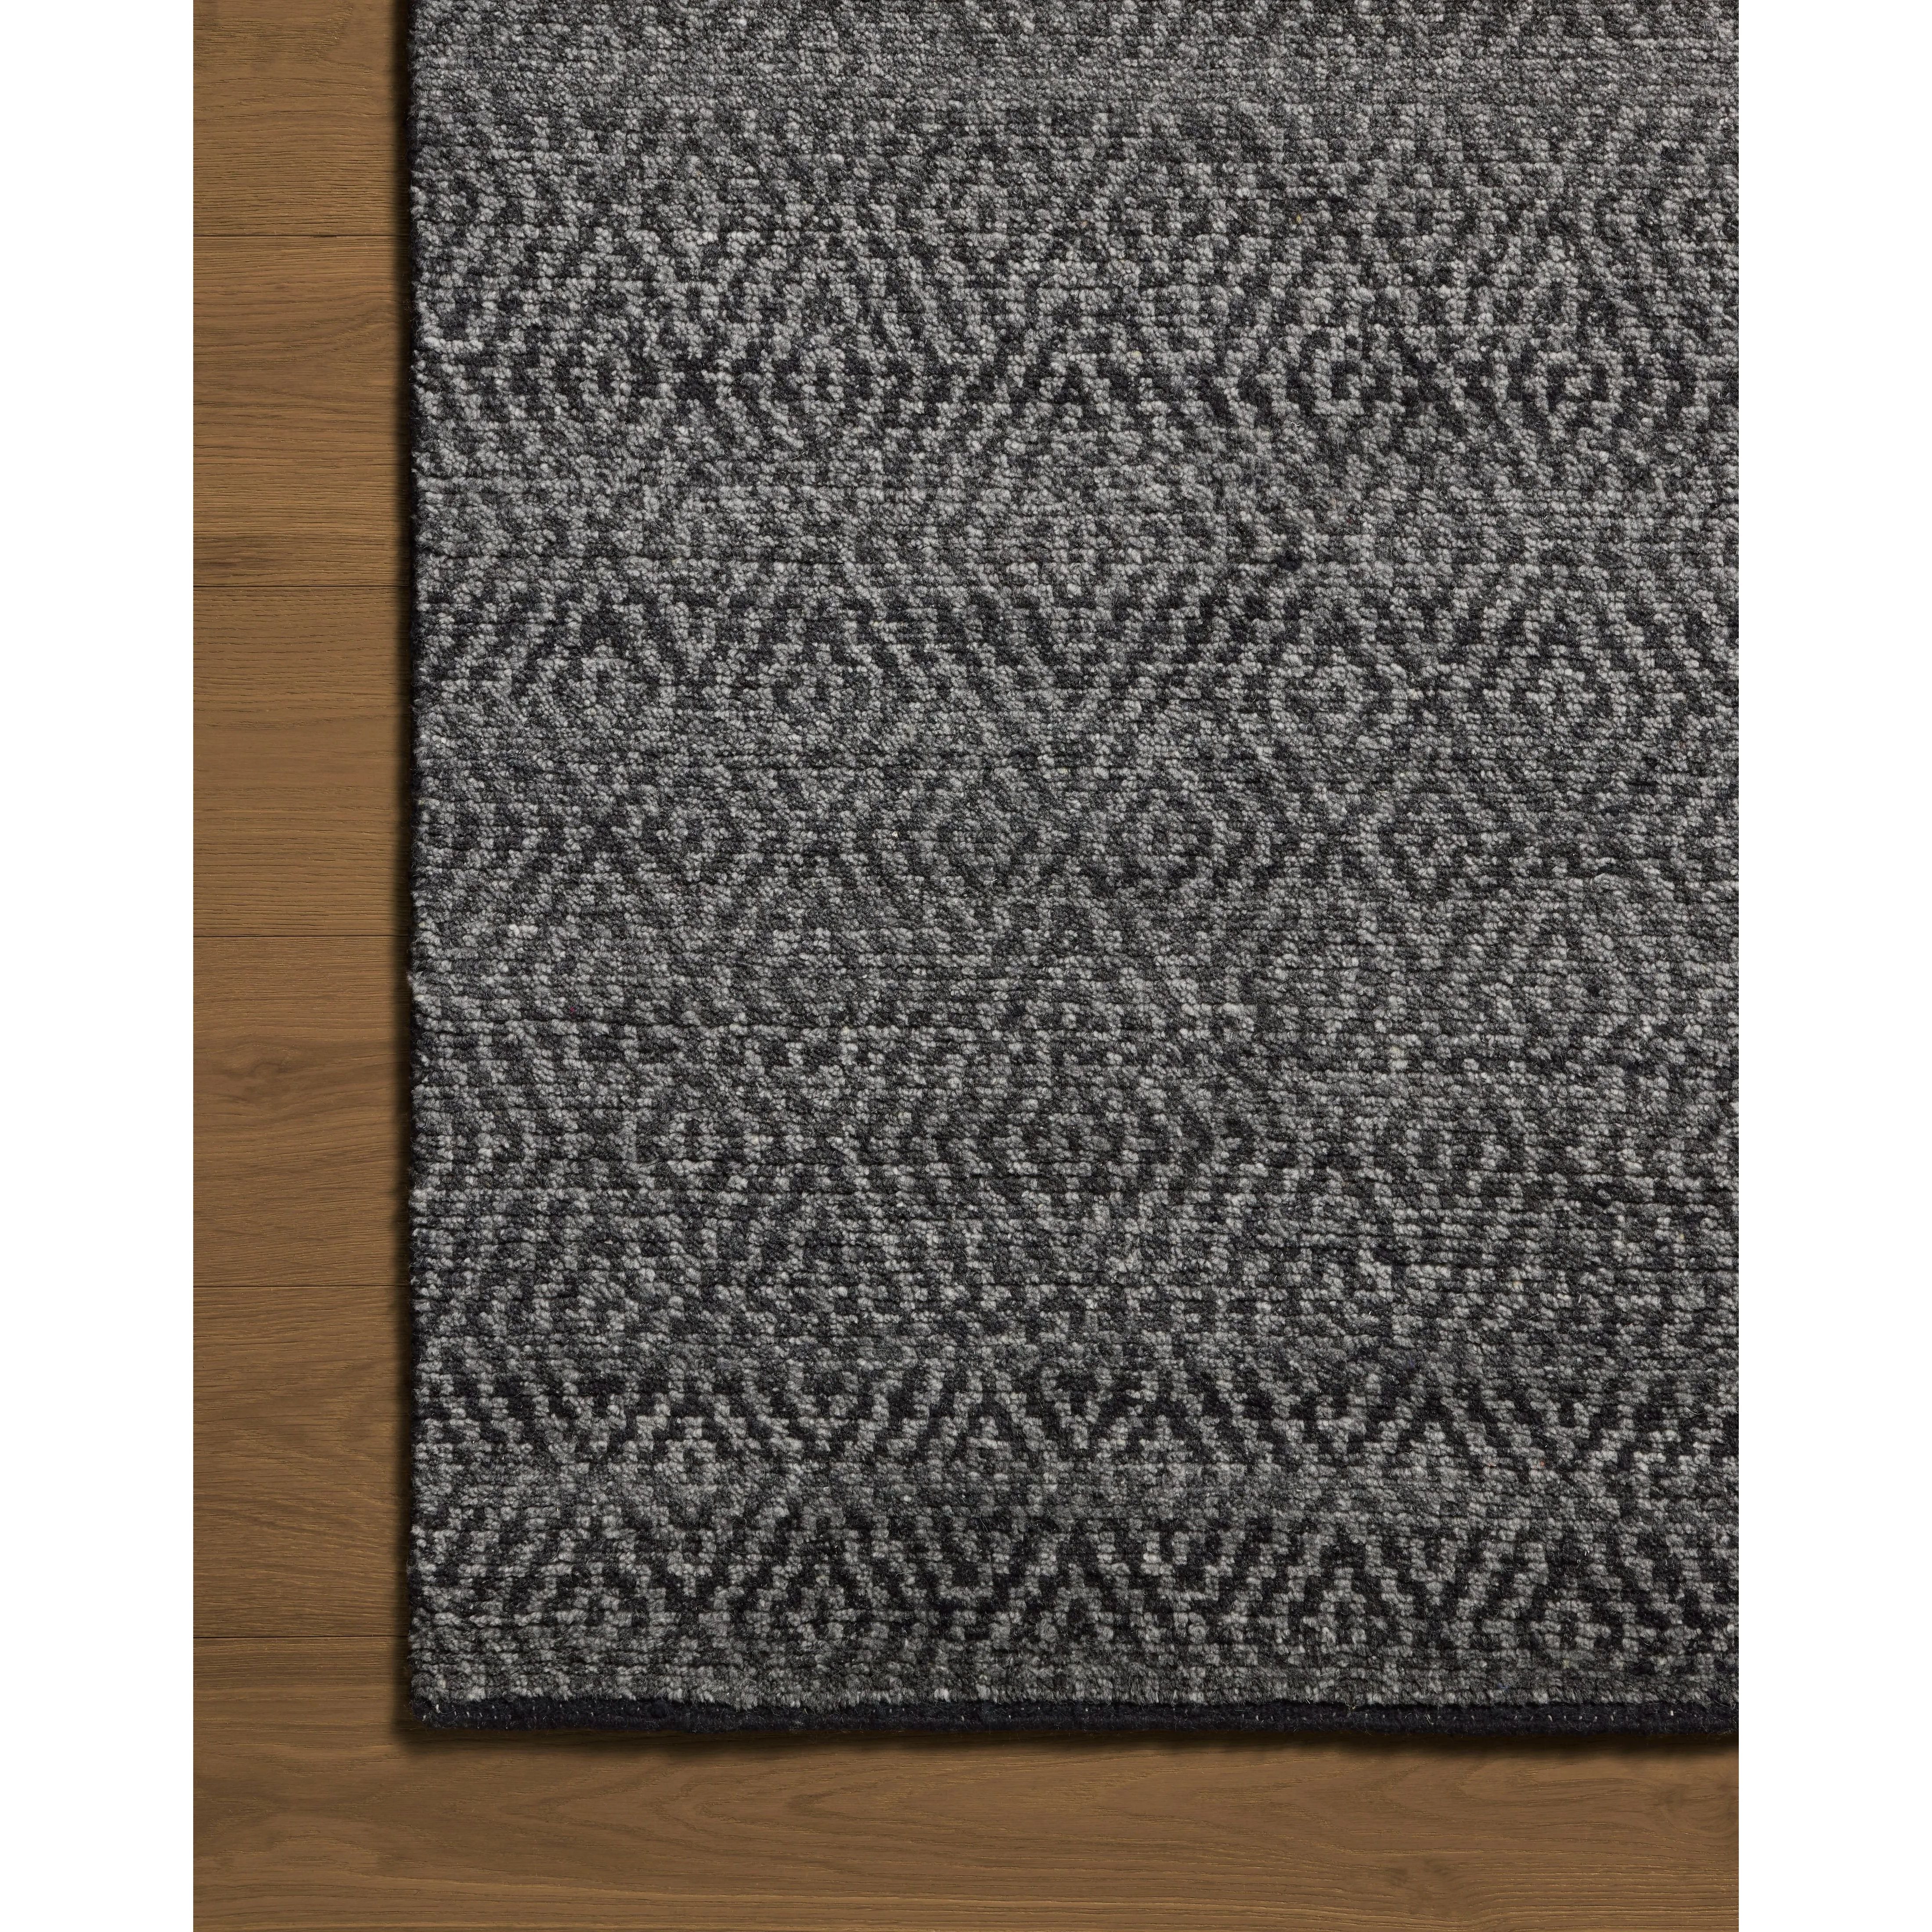 The Grace Charcoal Rug is a hand-knotted area rug with patterns inspired by traditional suiting fabrics, like houndstooth and tweed. The design’s smaller-scale patterns create depth, while the classic patterns invoke the warmth of English countryside interiors. Amethyst Home provides interior design, new home construction design consulting, vintage area rugs, and lighting in the Alpharetta metro area.